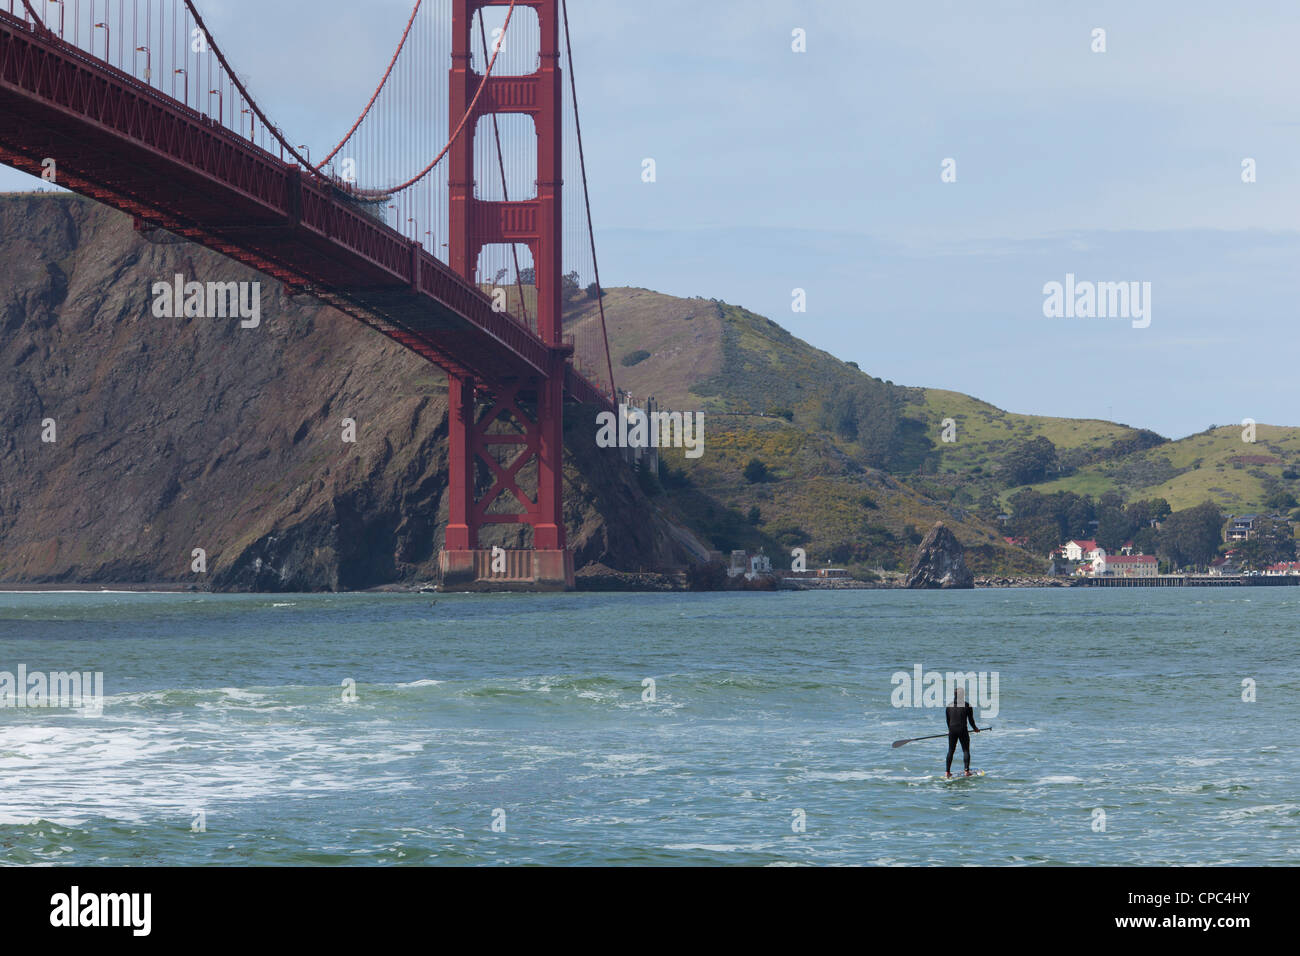 Paddle surfer at Fort Point, San Francisco Stock Photo